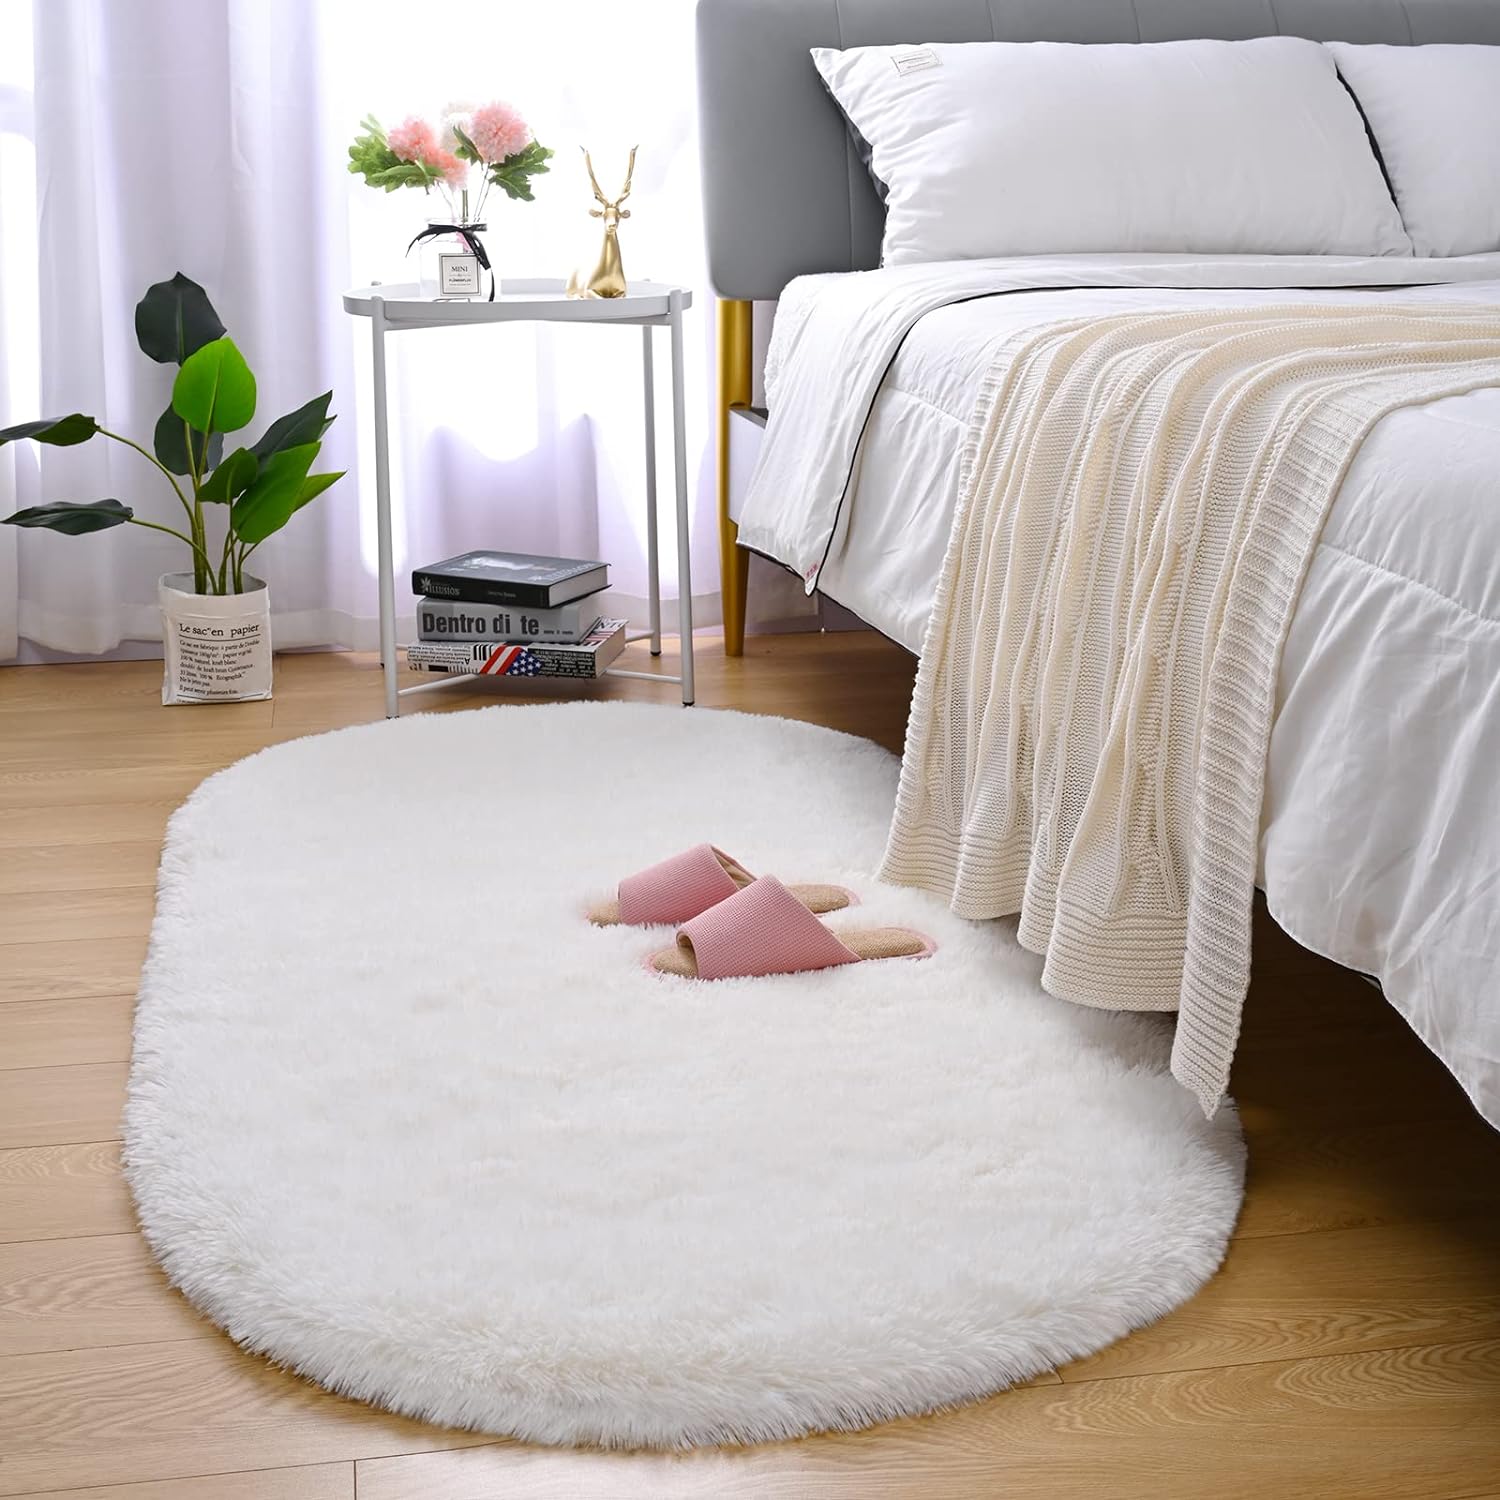 The Round Plush Rug category presents you with two unique and elegant carpet products: Round Fluffy Rug and Fluffy Circle Rug.